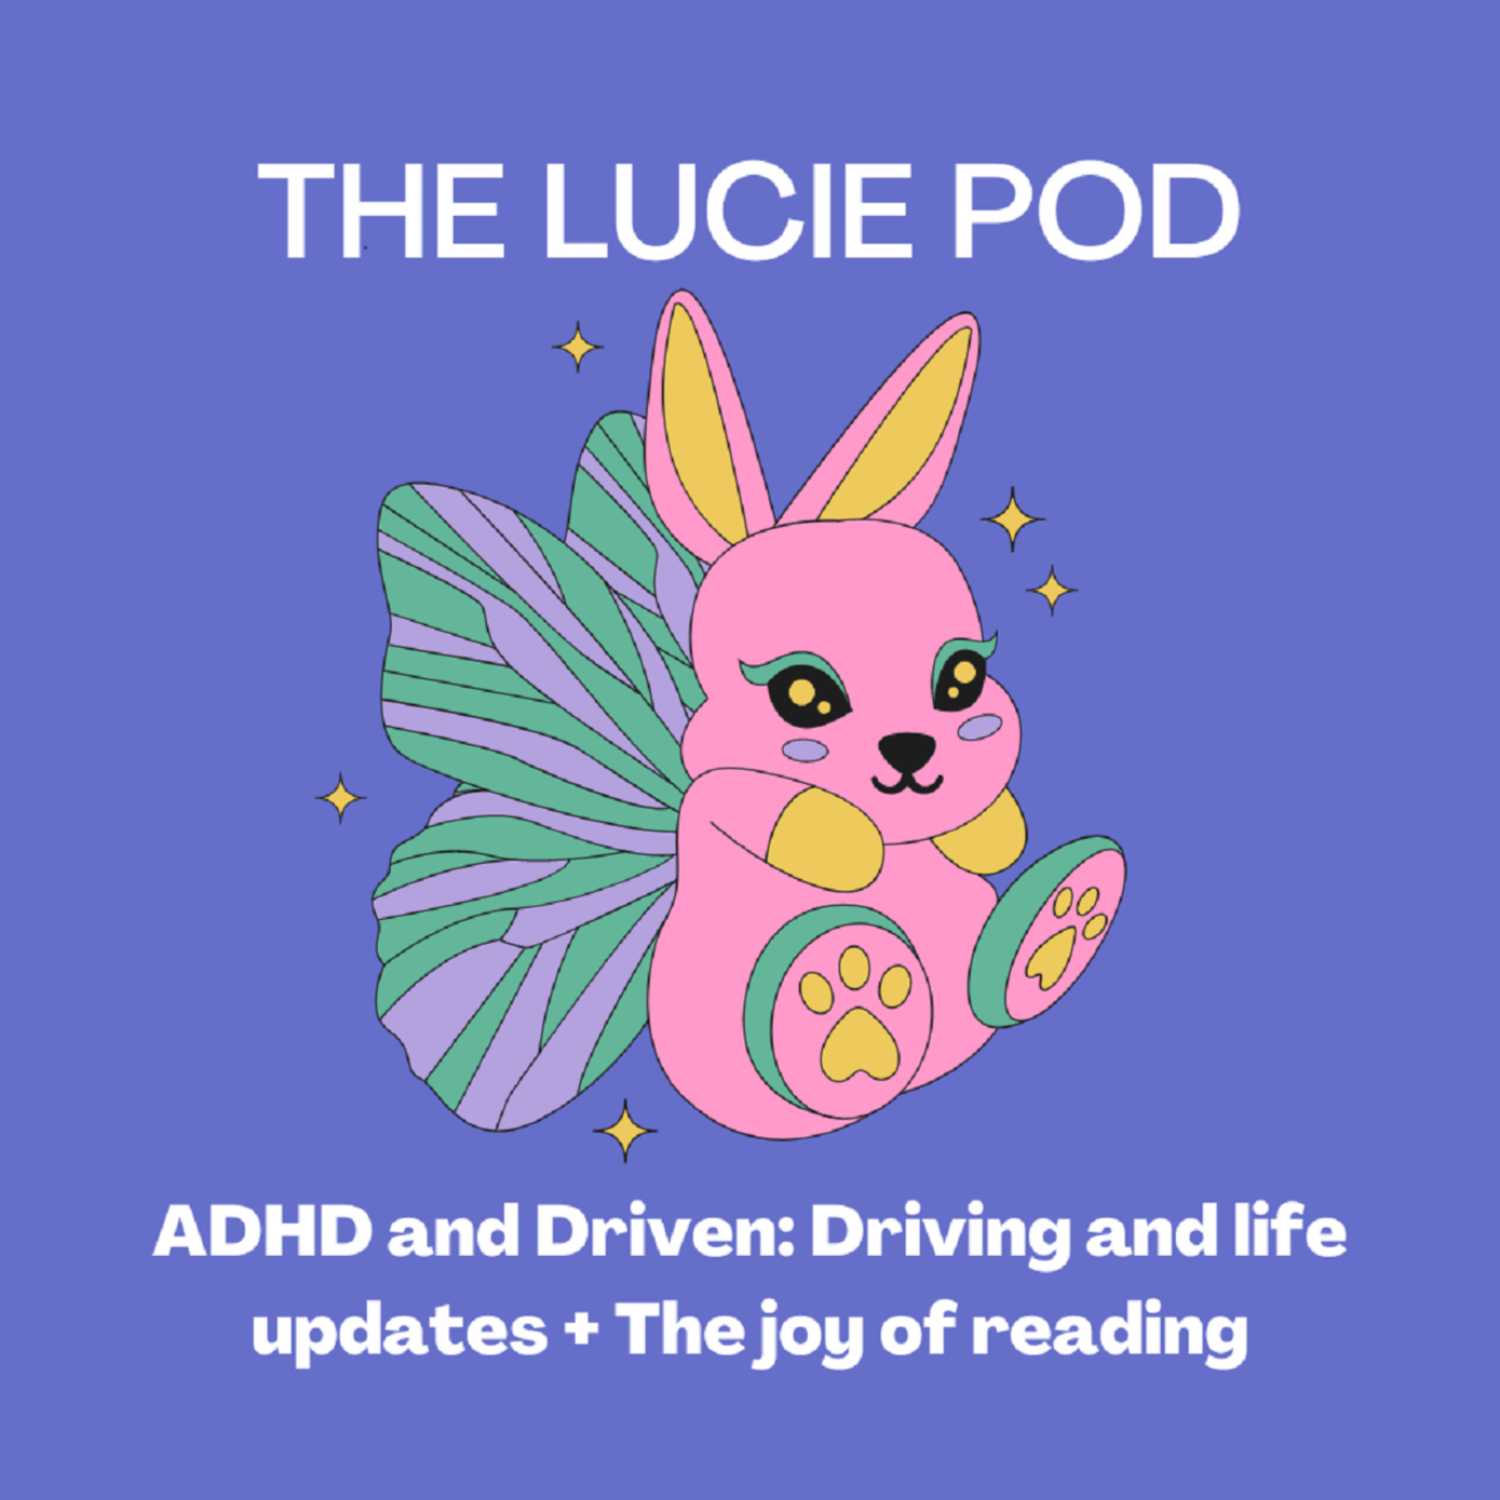 ADHD and Driven: Driving and life updates + the joy of reading